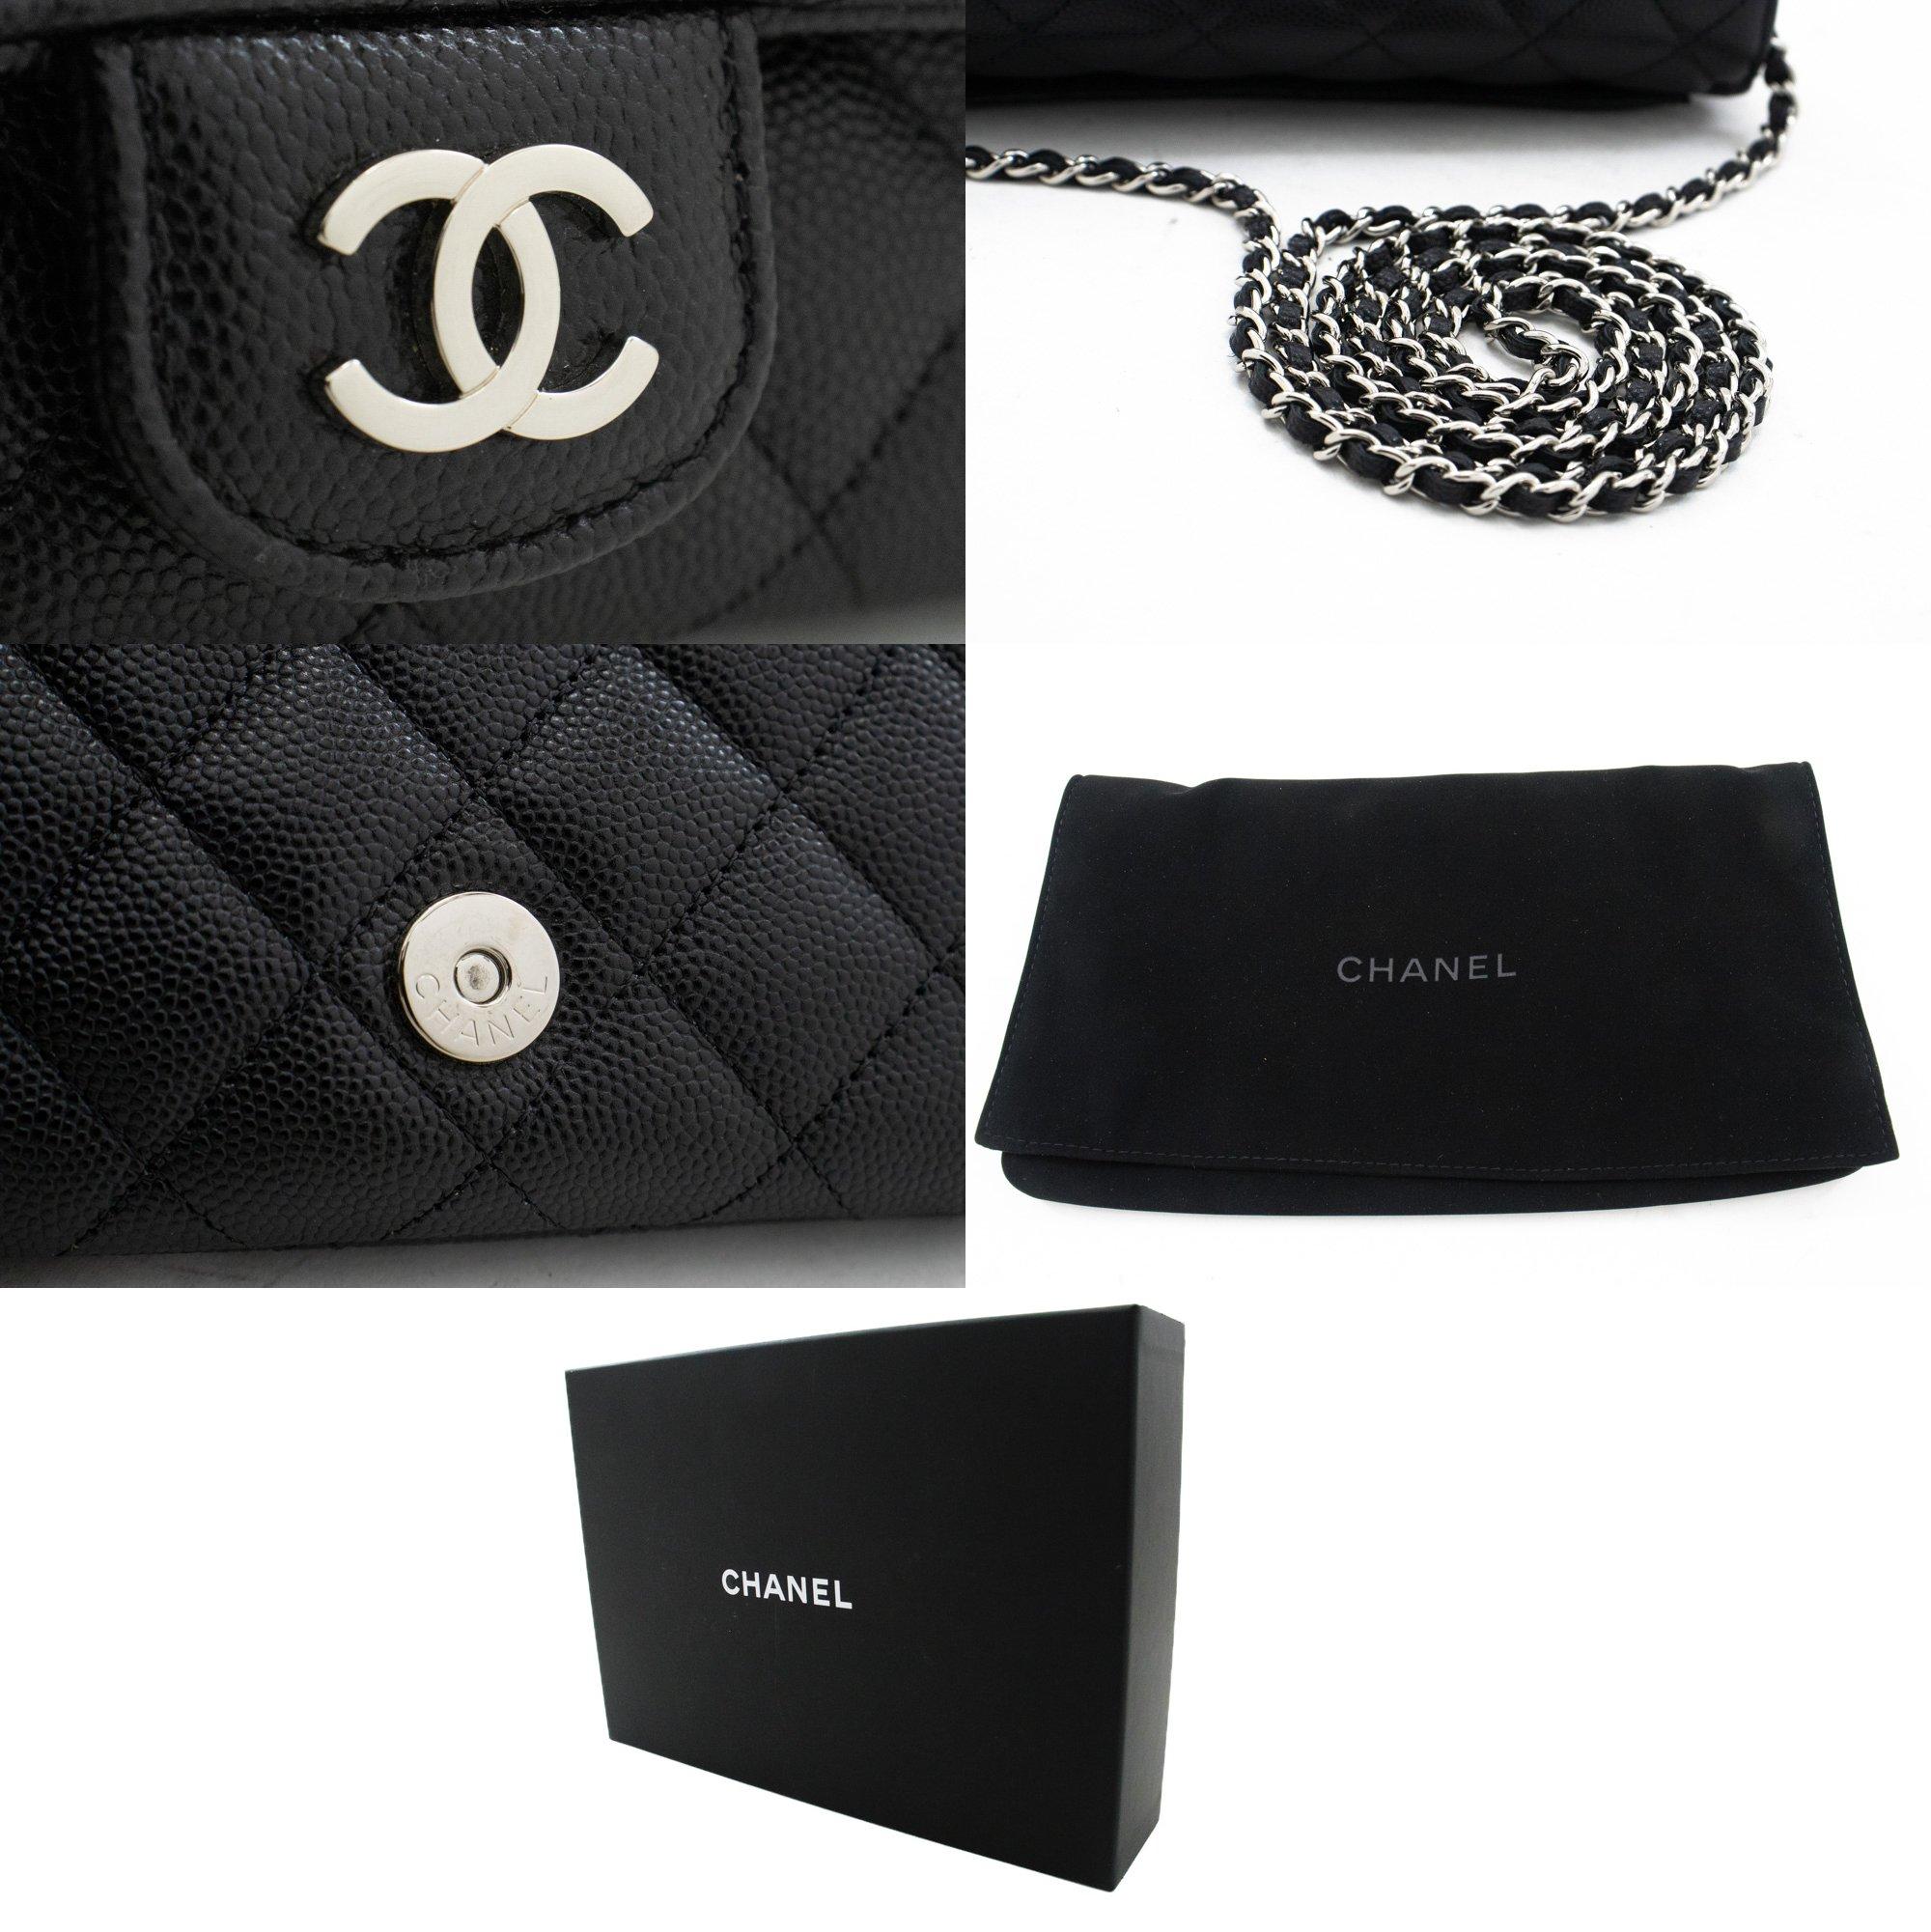 CHANEL Flap Phone Holder With Chain Bag Black Crossbody Clutch For Sale 3